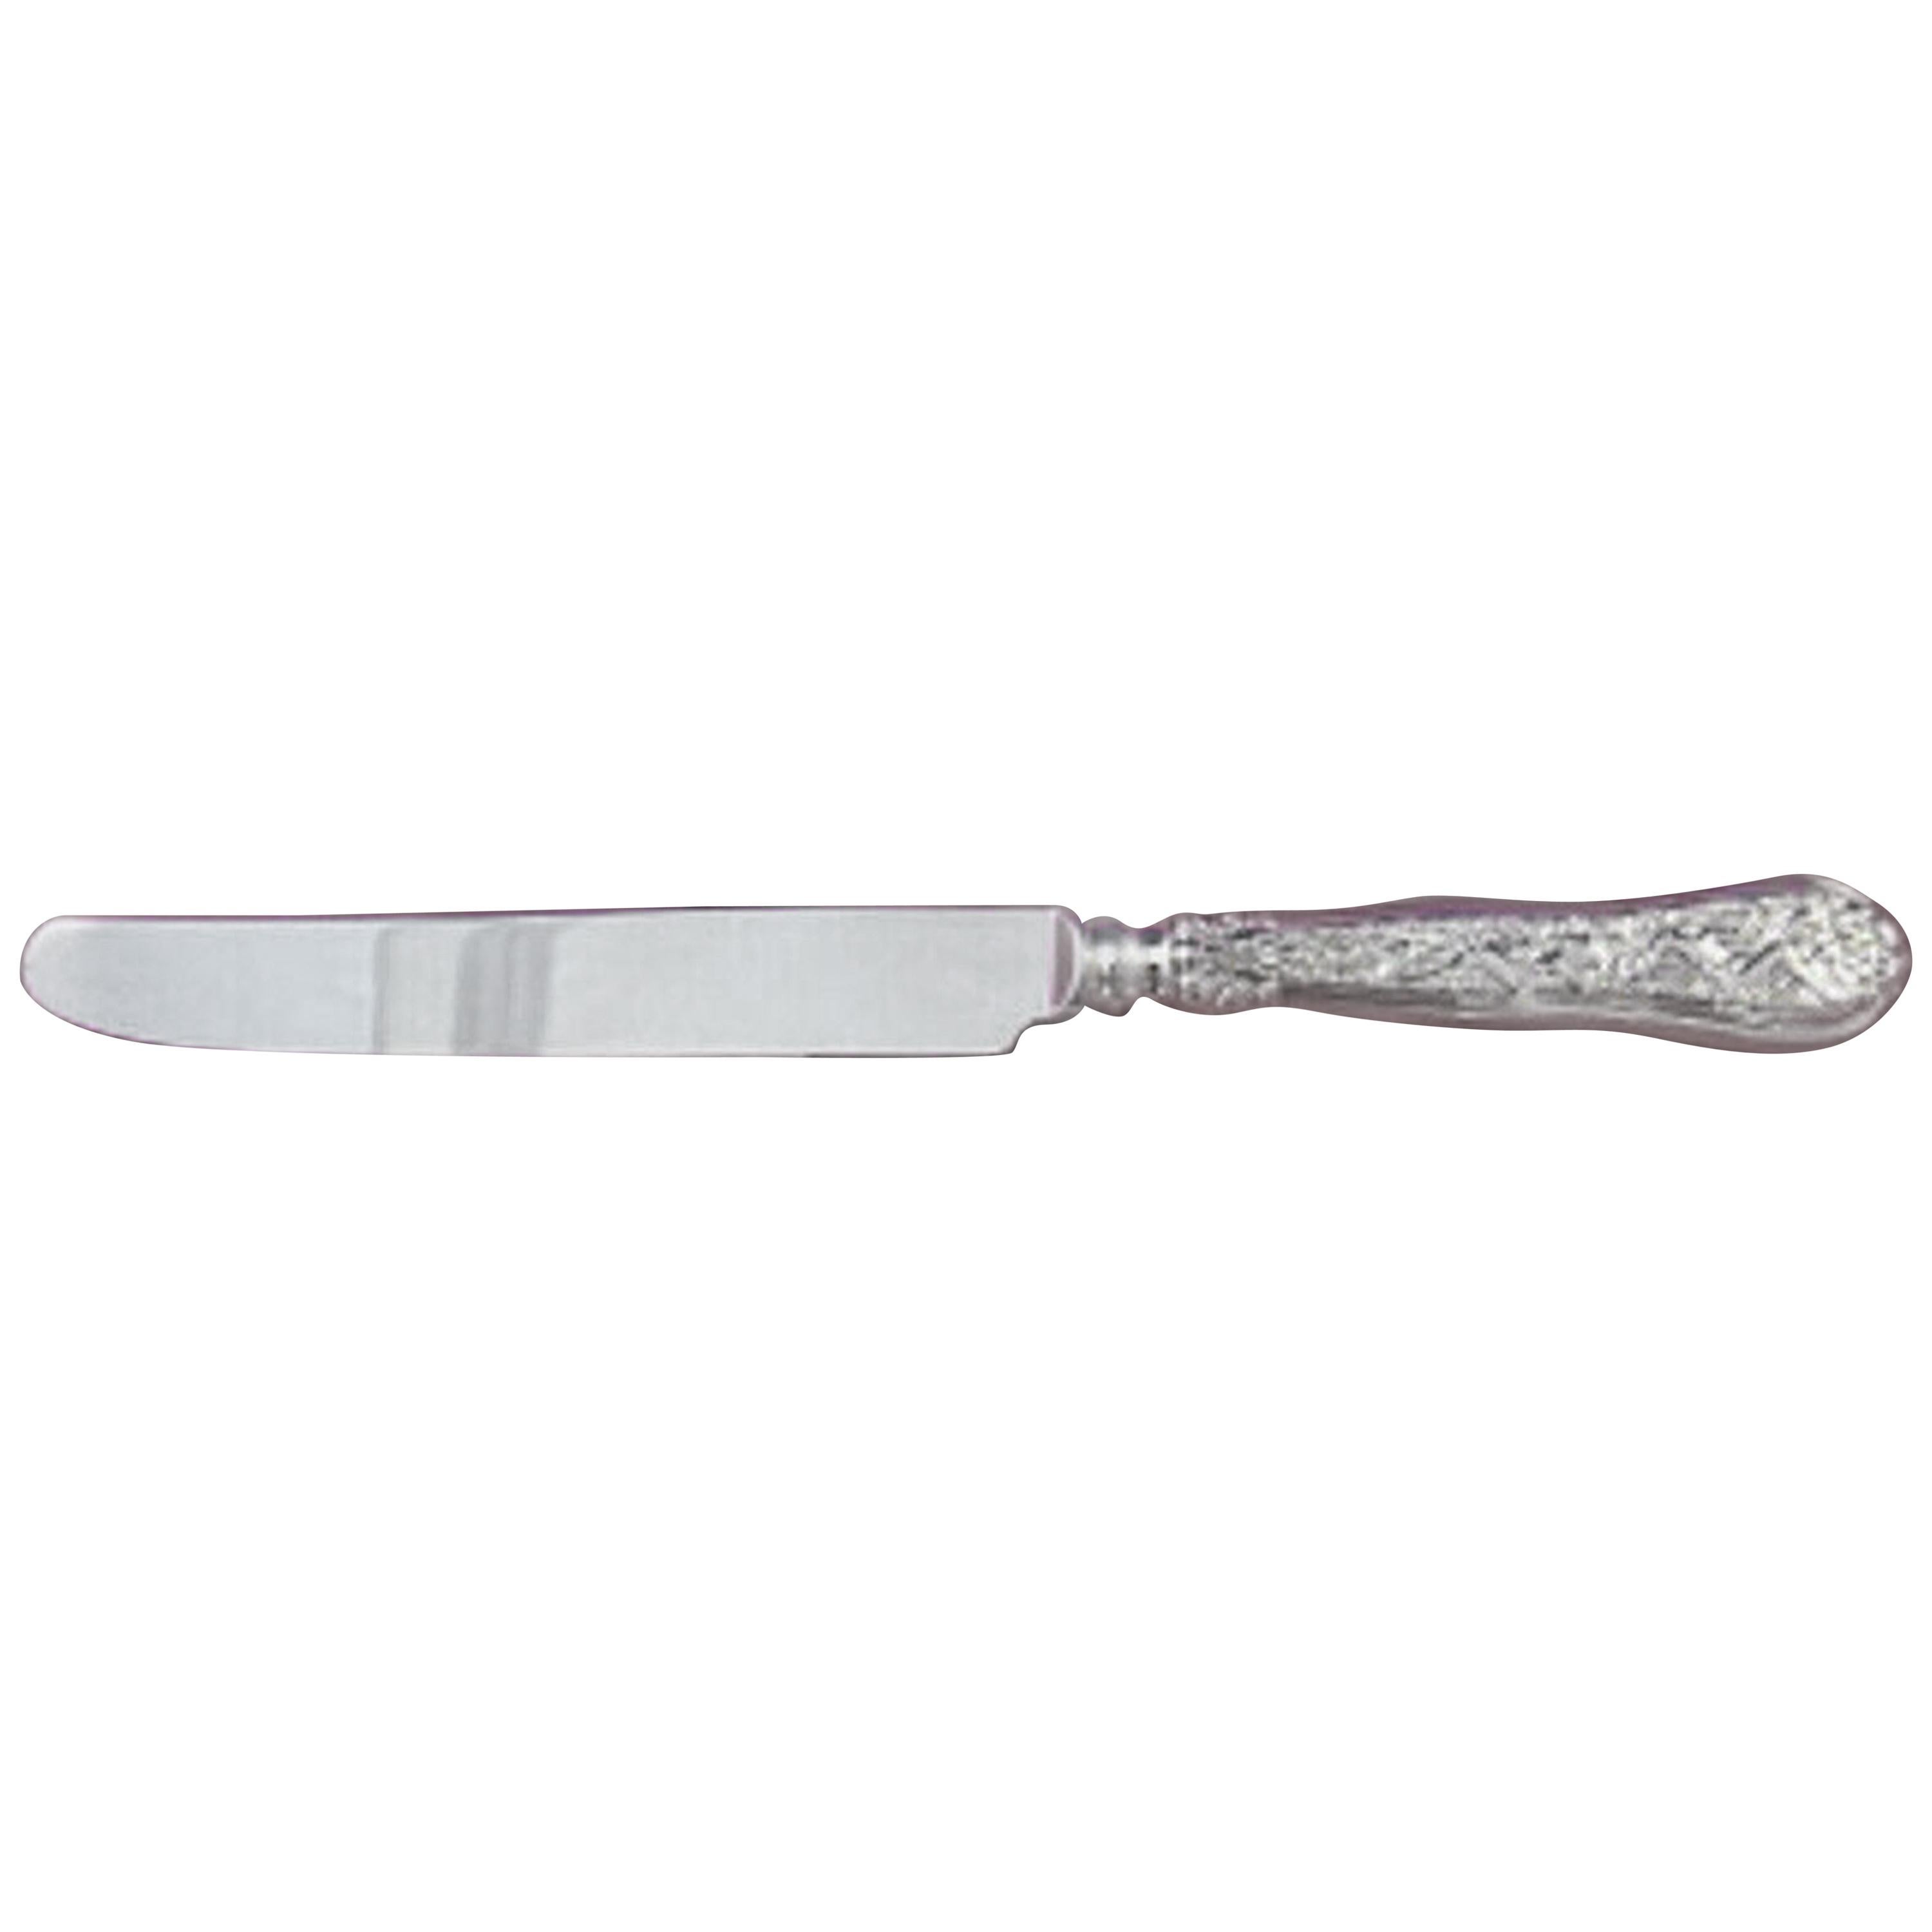 Olympian by Tiffany and Co Sterling Silver Breakfast Junior Knife, French